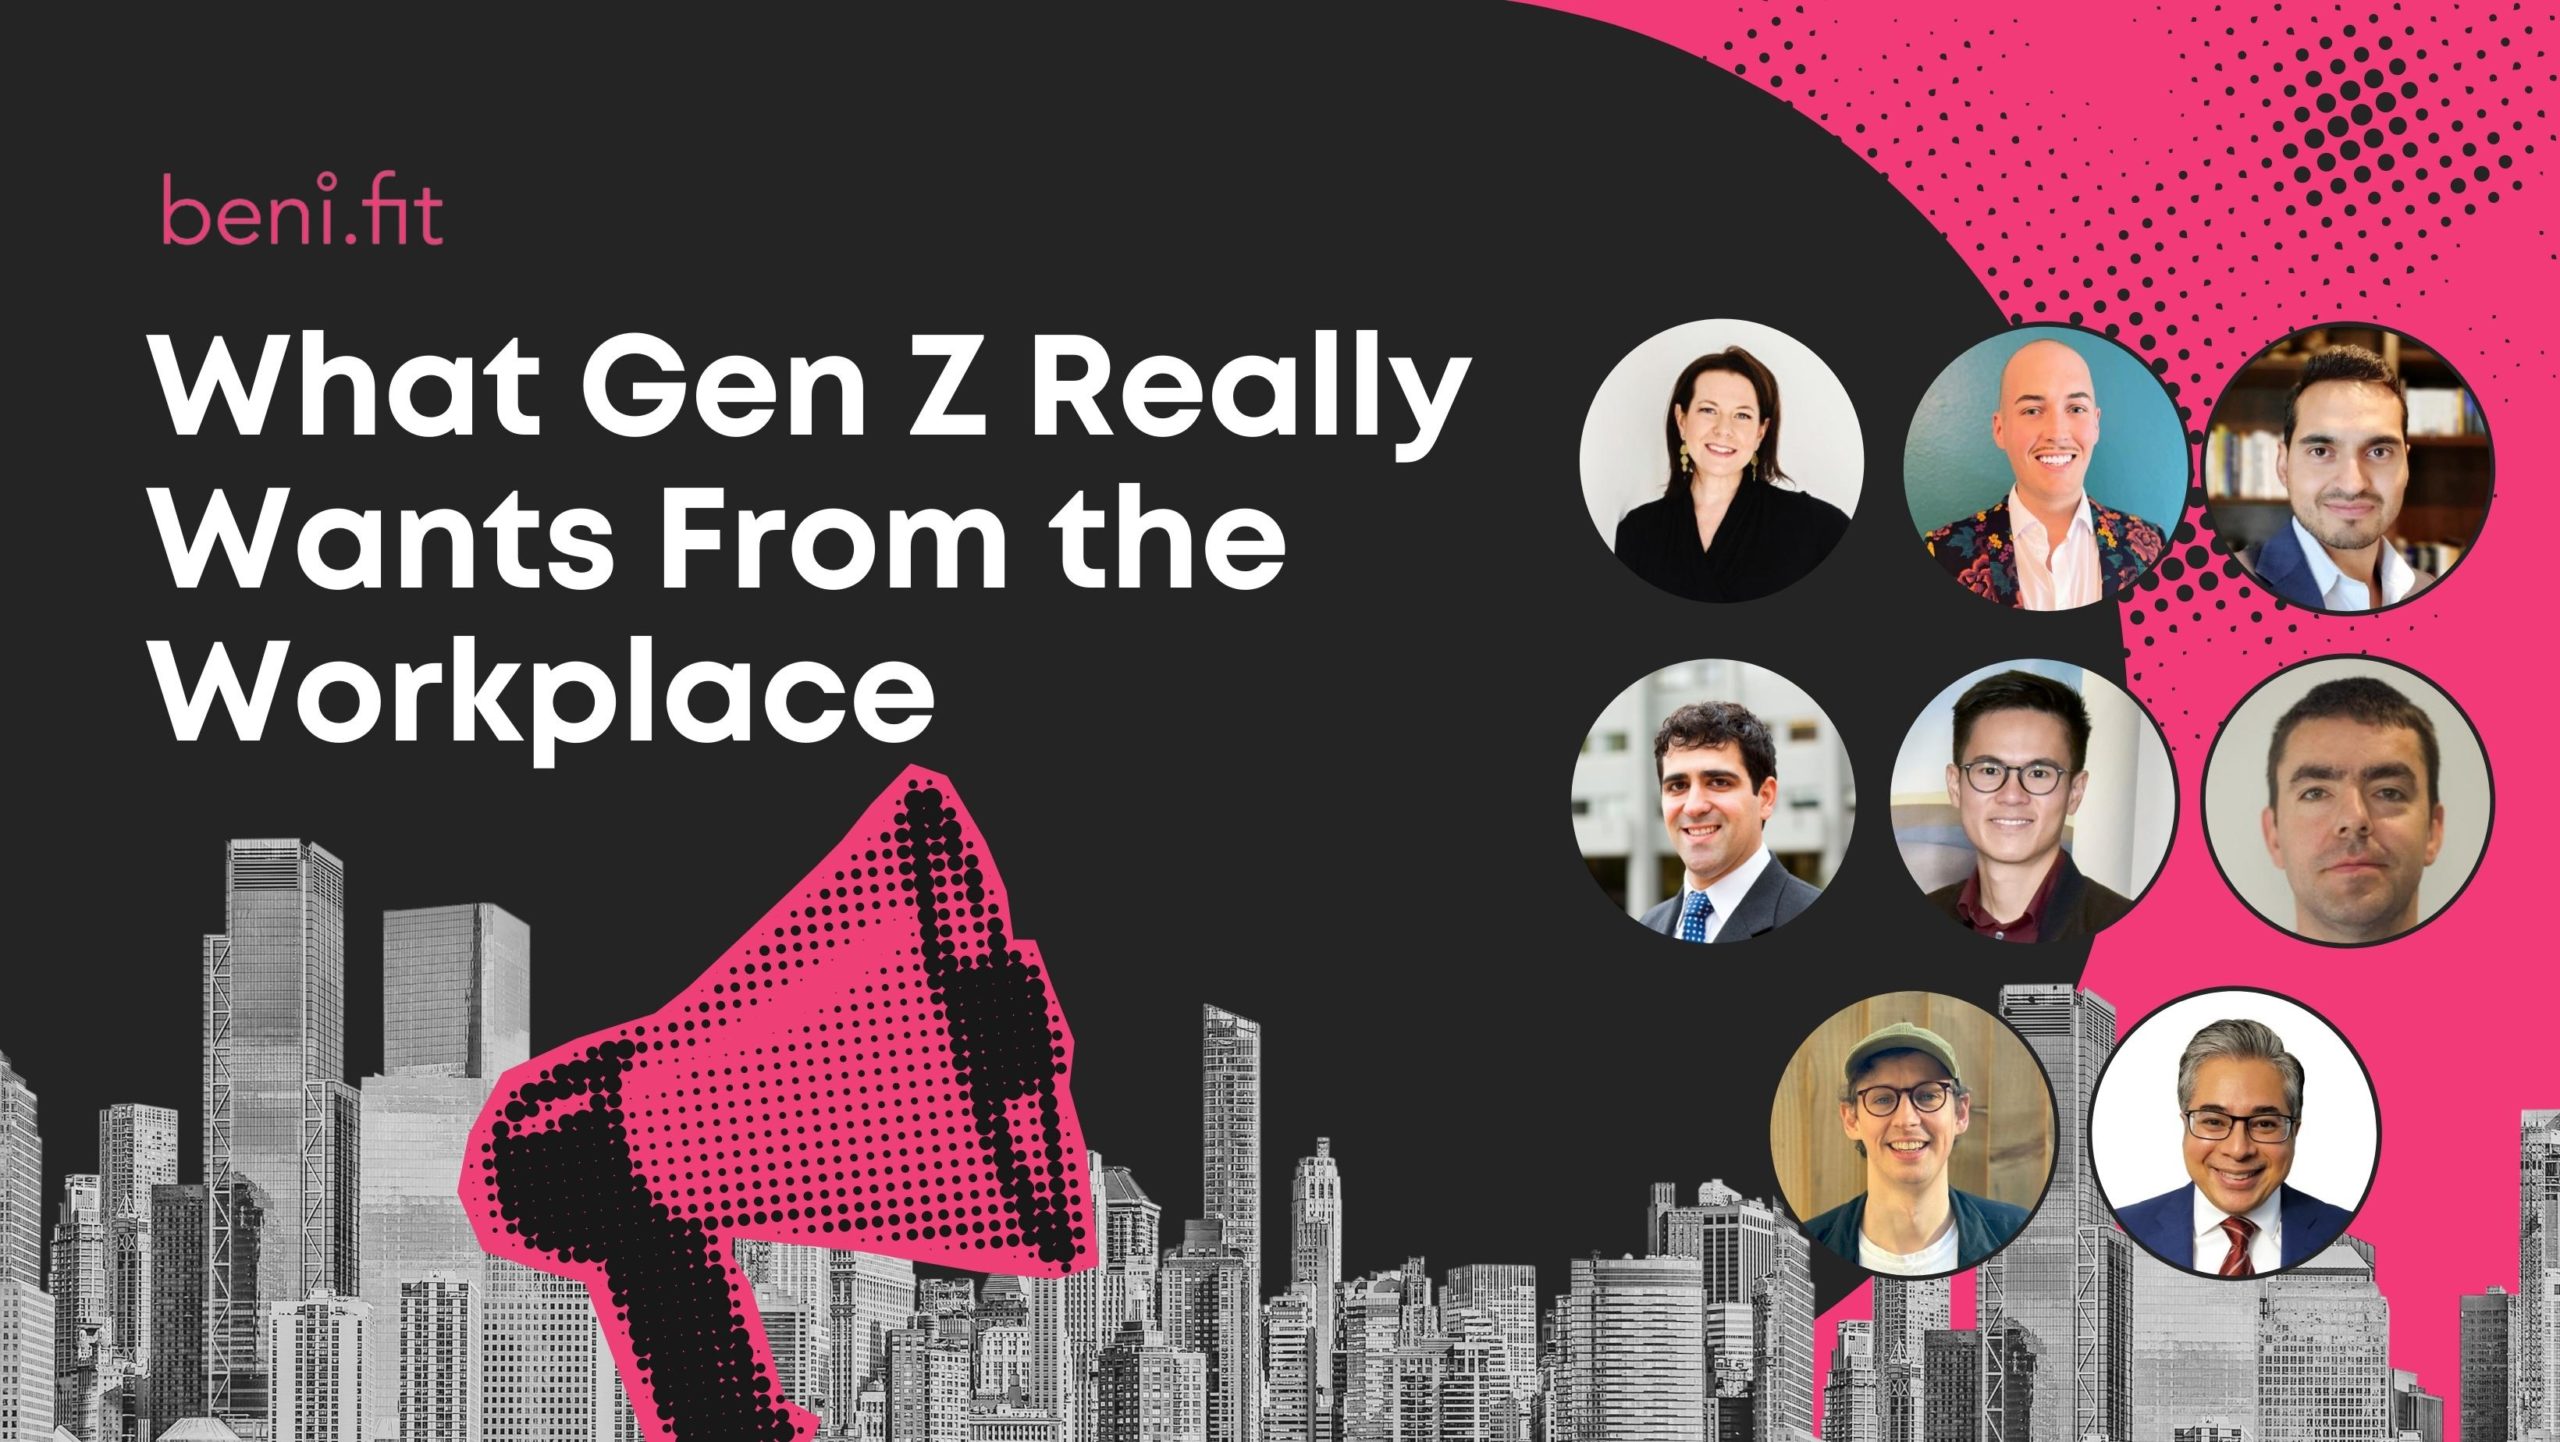 What Gen Z Really Wants From the Workplace